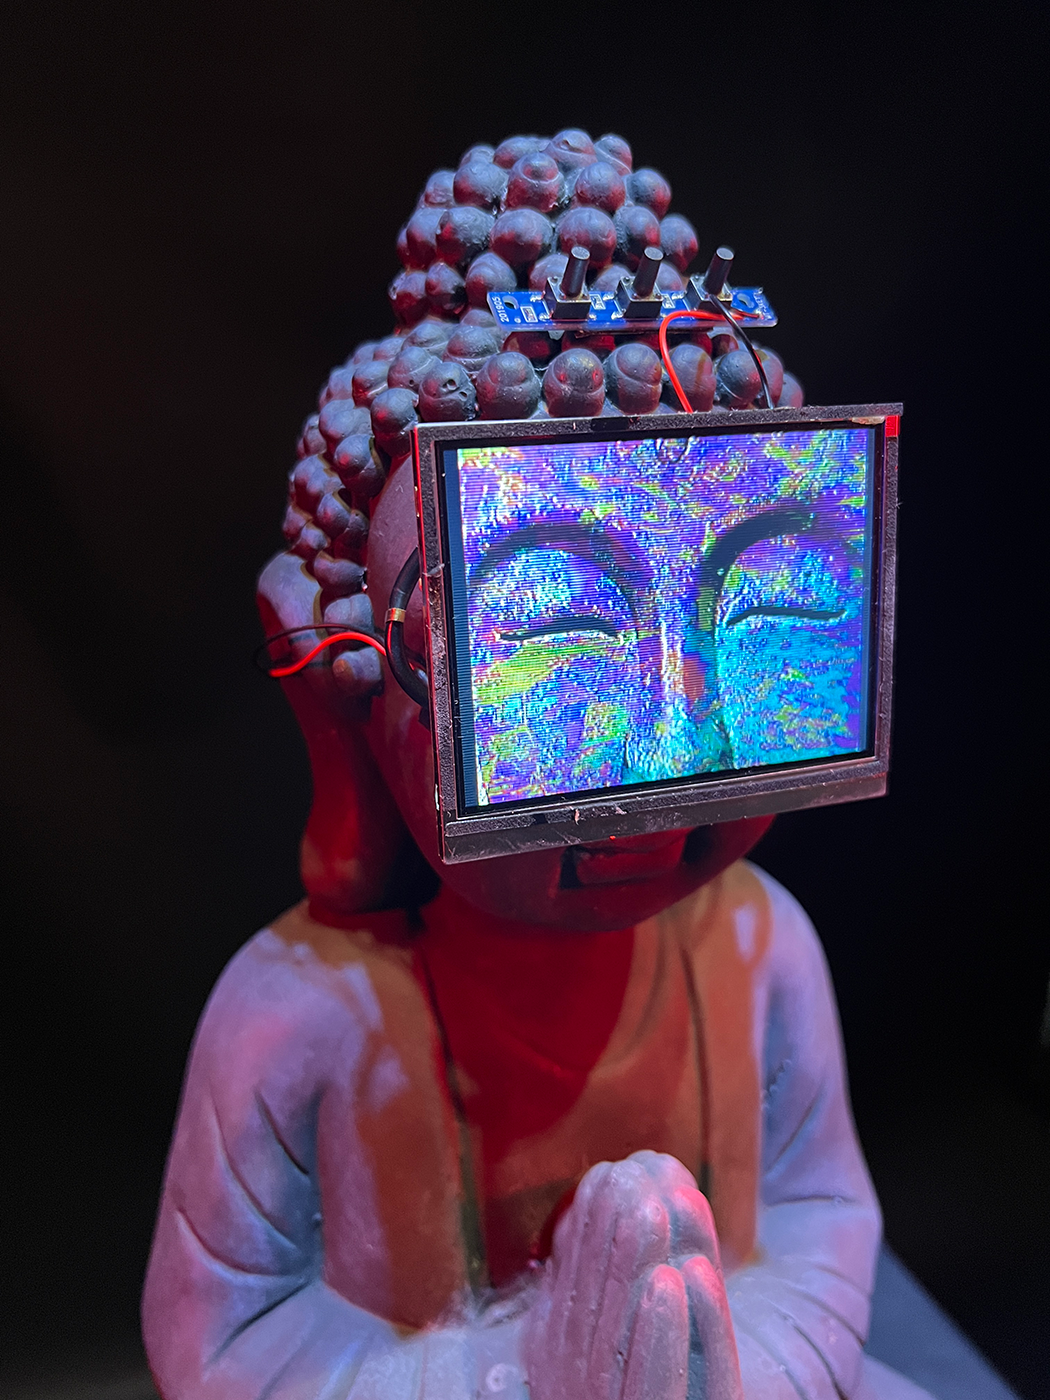 AR_TVBuddha "An interactive, geospatial, location-based Augmented Reality project"